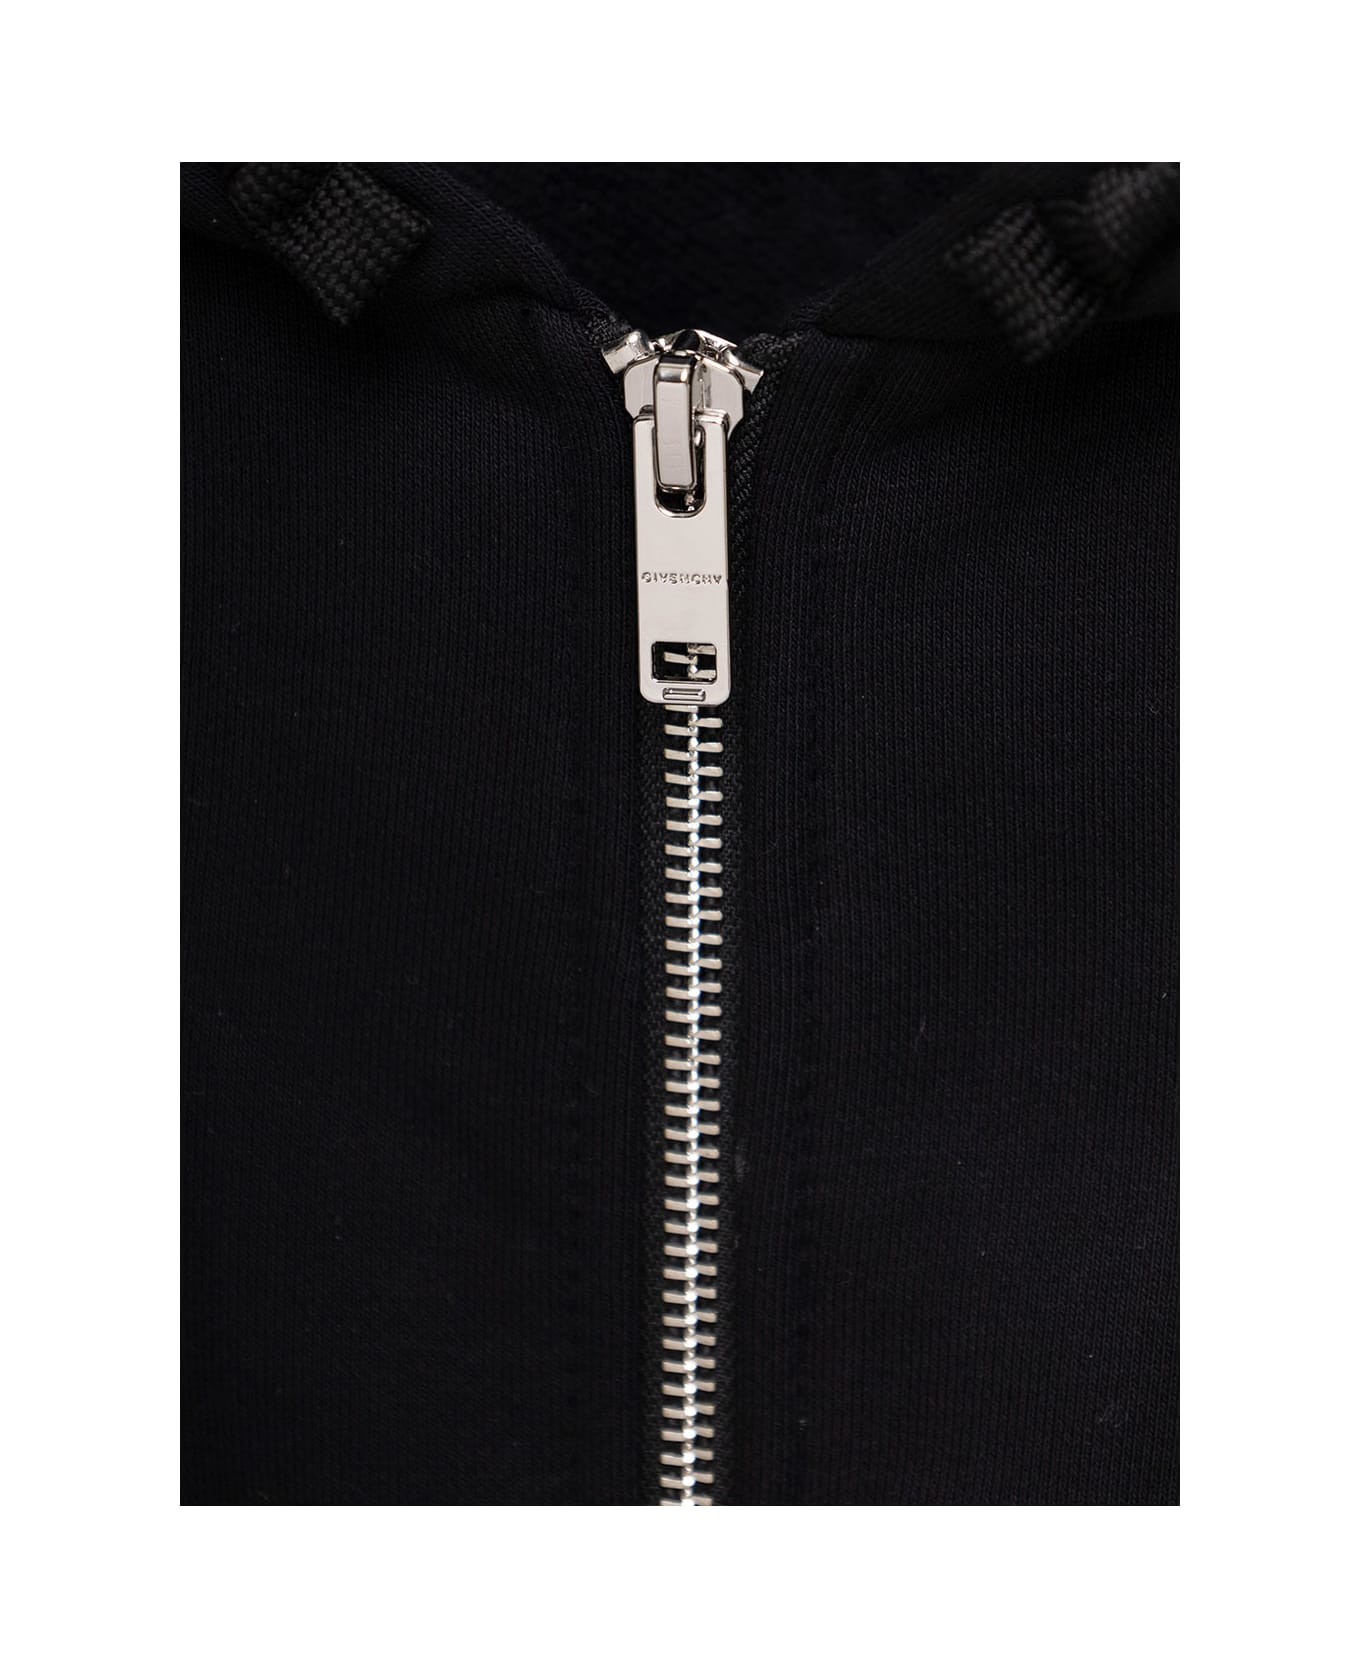 Givenchy Black Jersey Hoodie With Logo Givenchy Kids Boy - Black